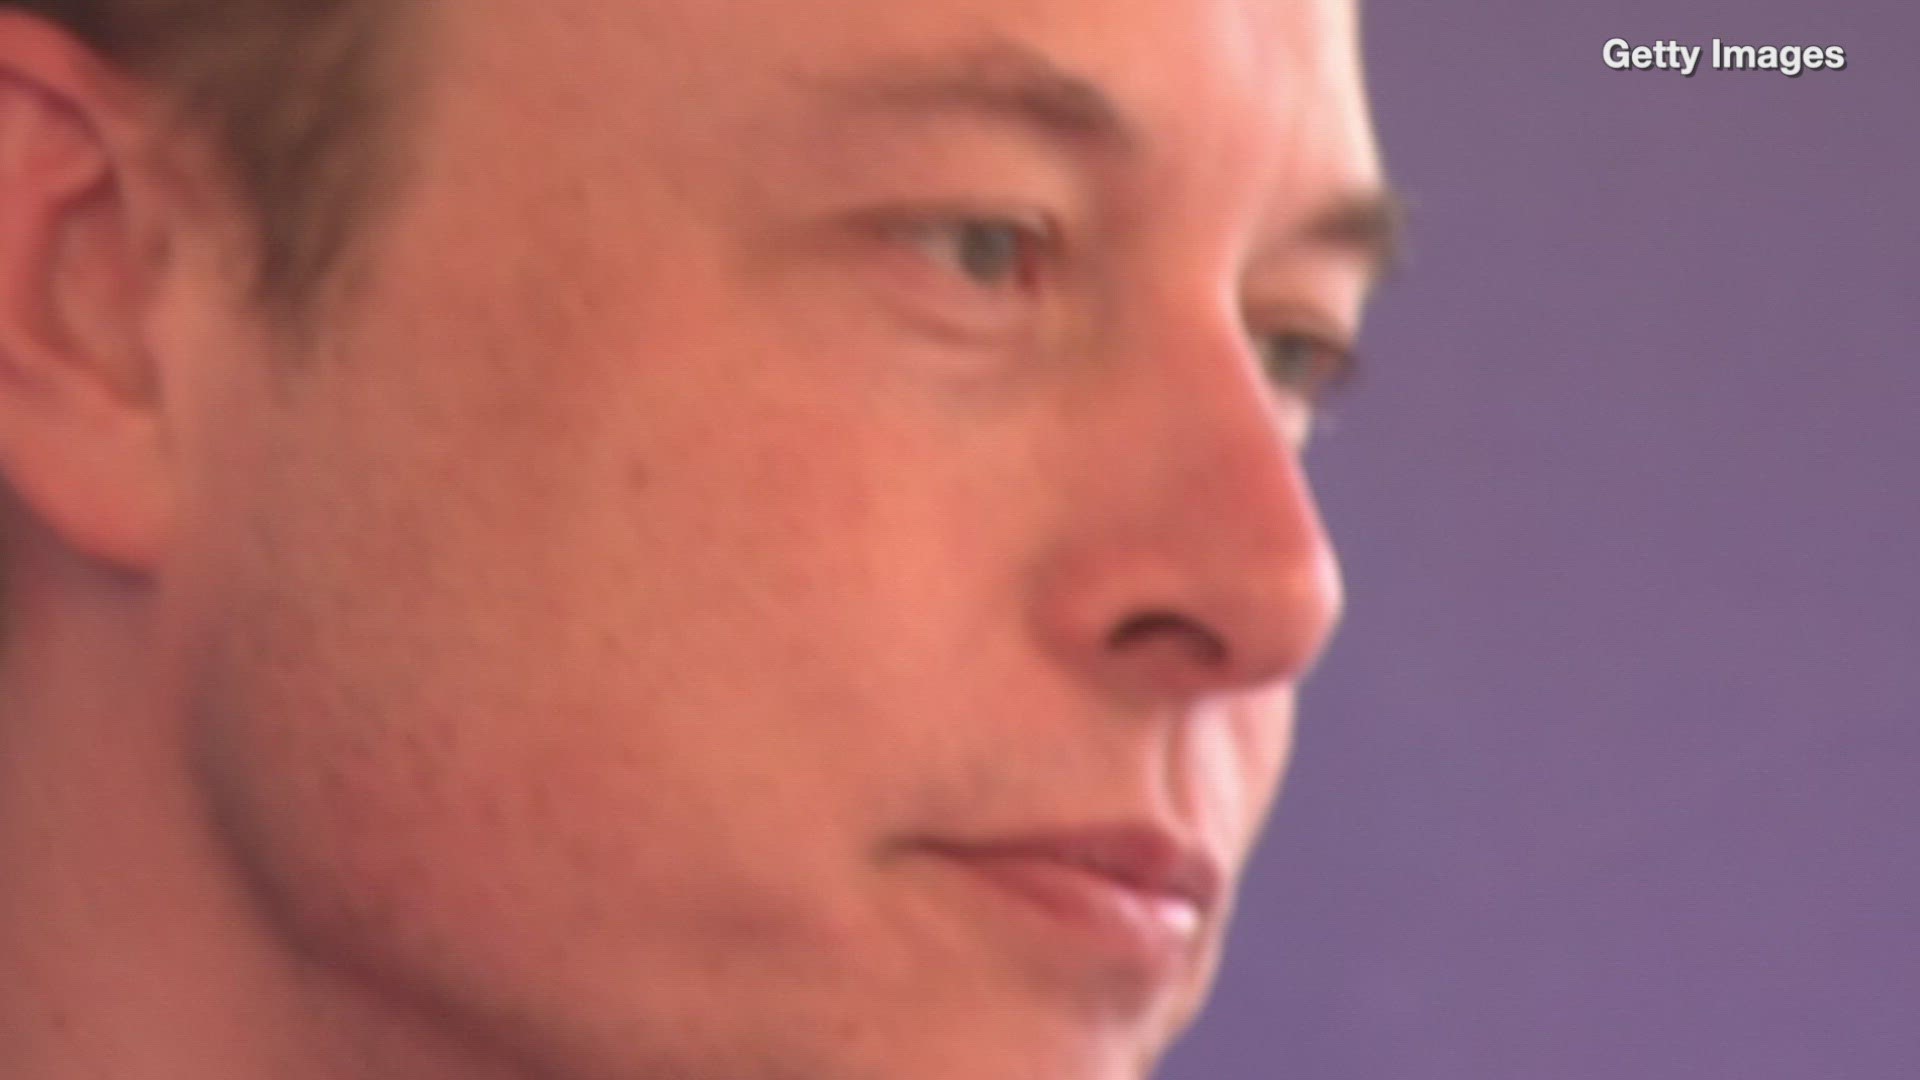 Elon Musk is calling for Amazon to be broken up, calling the ecommerce giant a 'monopoly.'